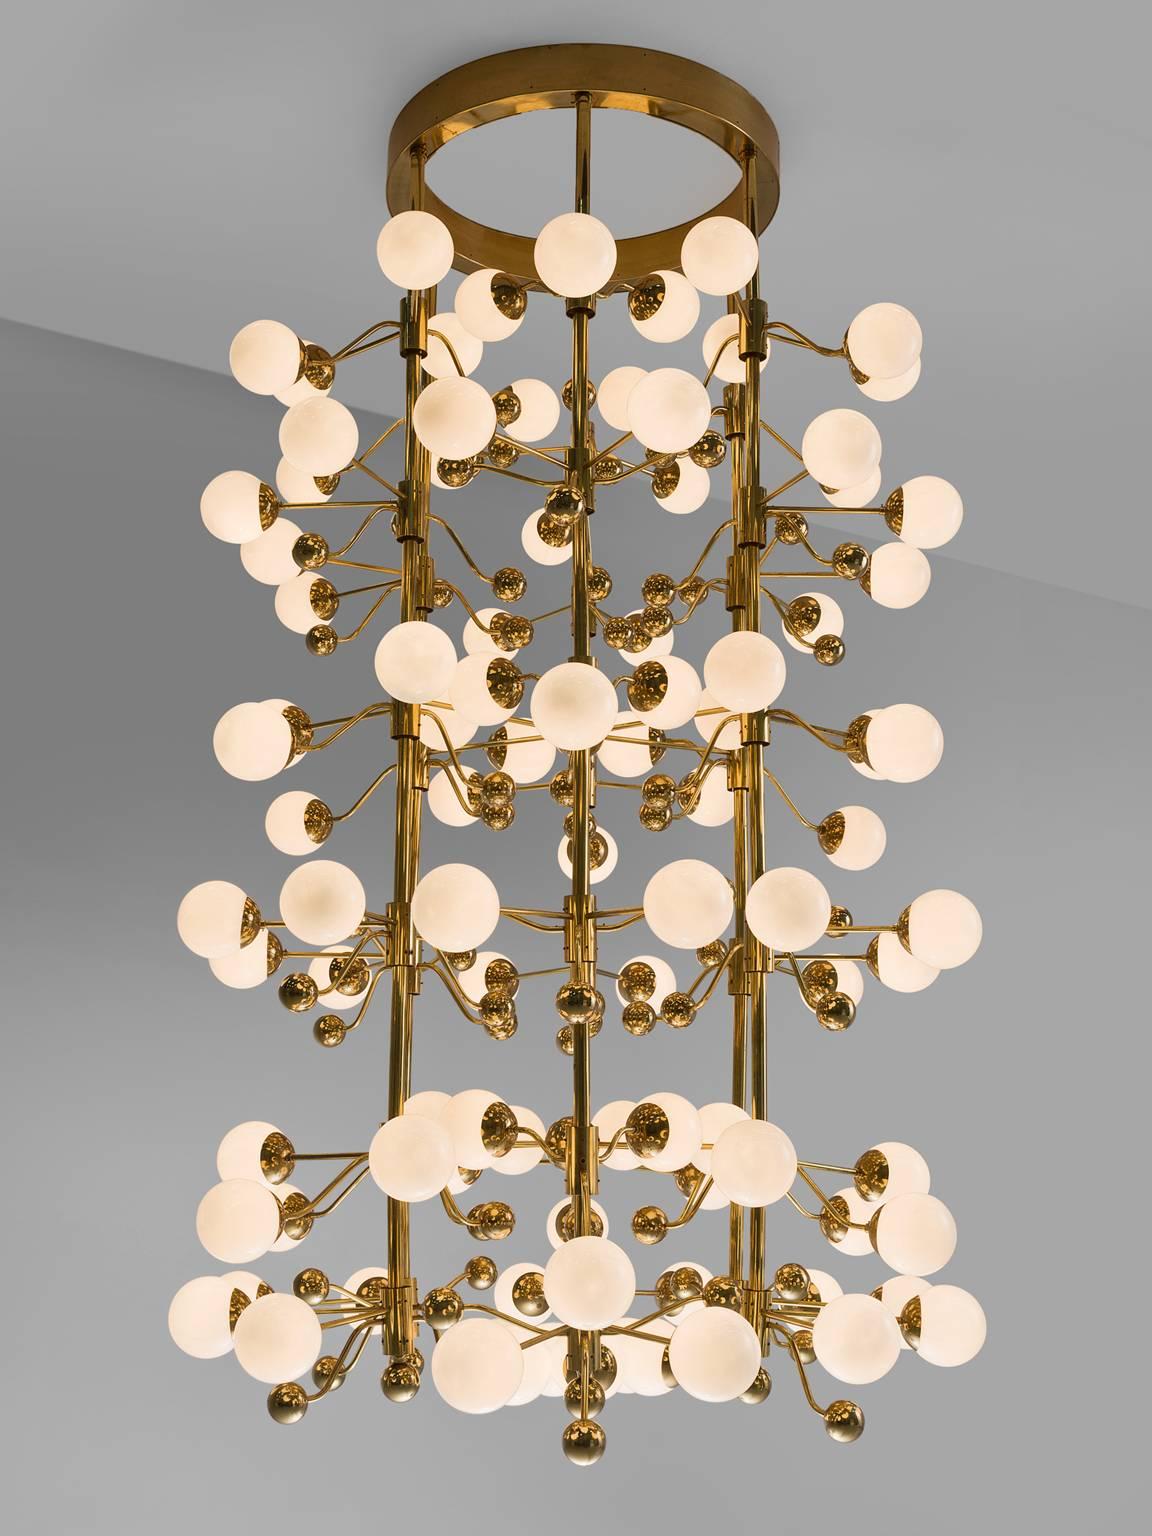 Chandelier, in glass and brass, Europe, 1960s.

Extremely grand and large chandelier with brass fixture and opaline glass spheres. Due the combination of materials and the several levels, this chandelier has a warm and diffuse light and a stunning